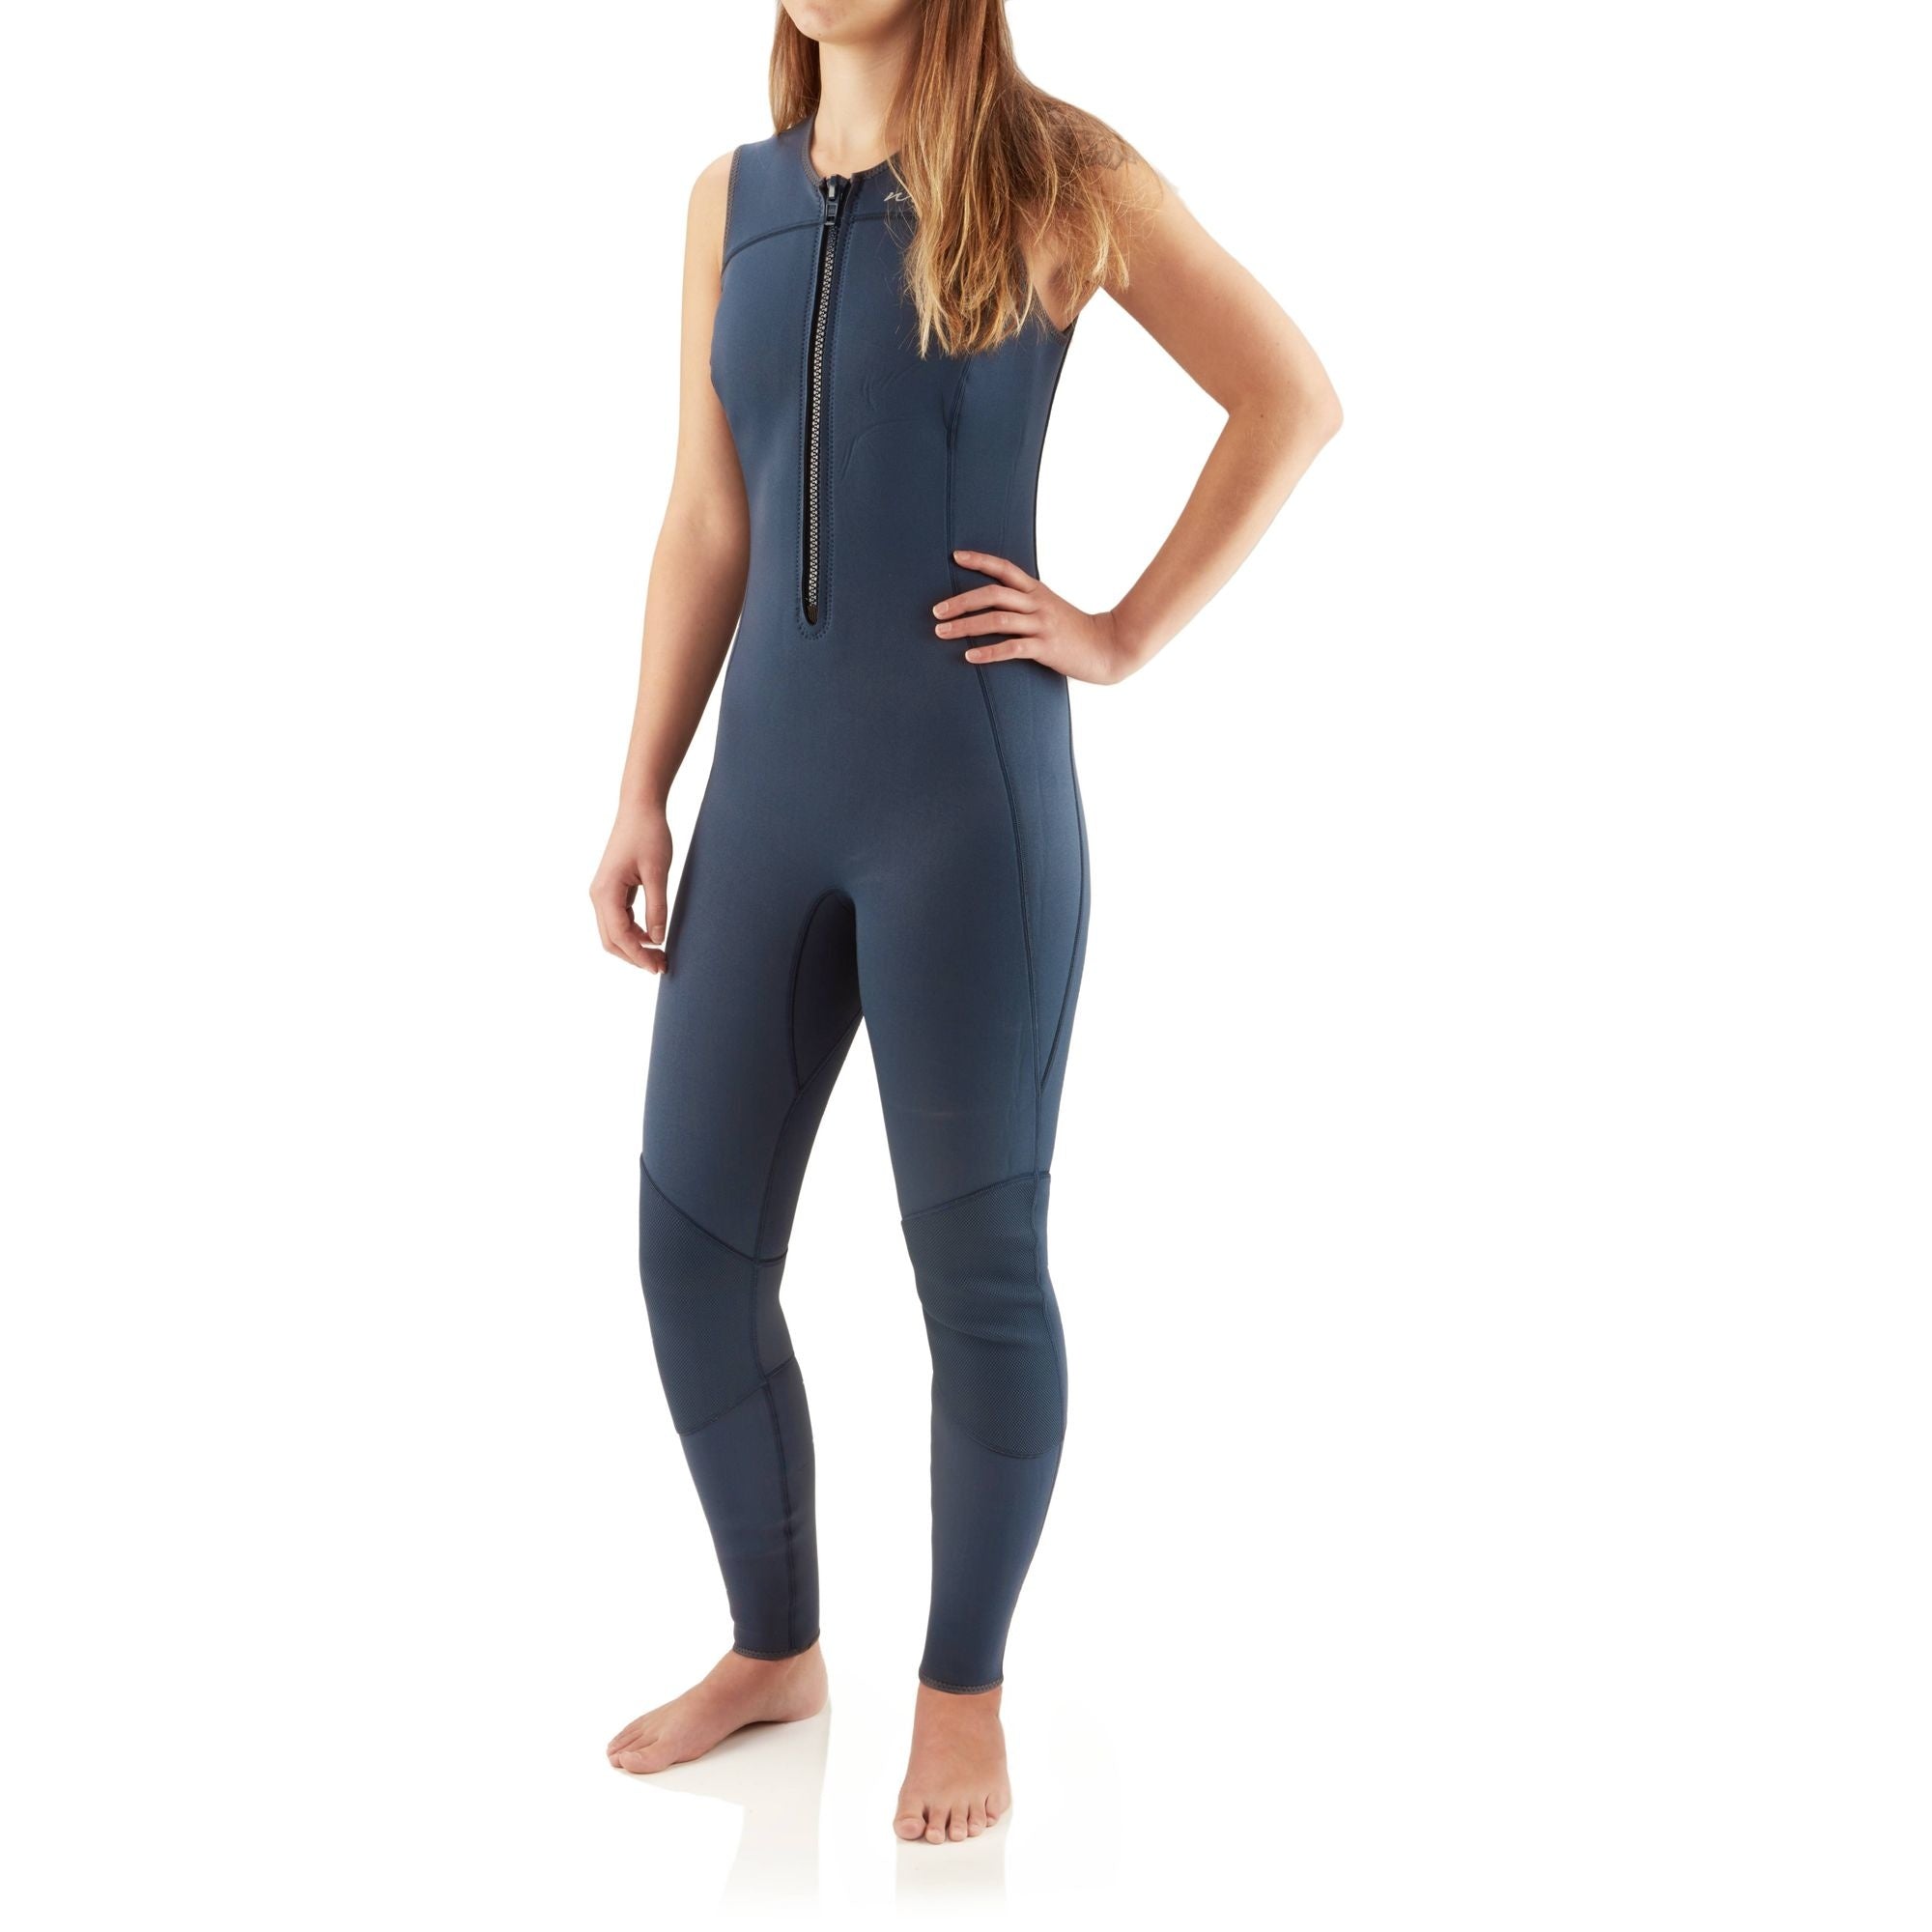 NRS - Women's 3.0 Ignitor Wetsuit